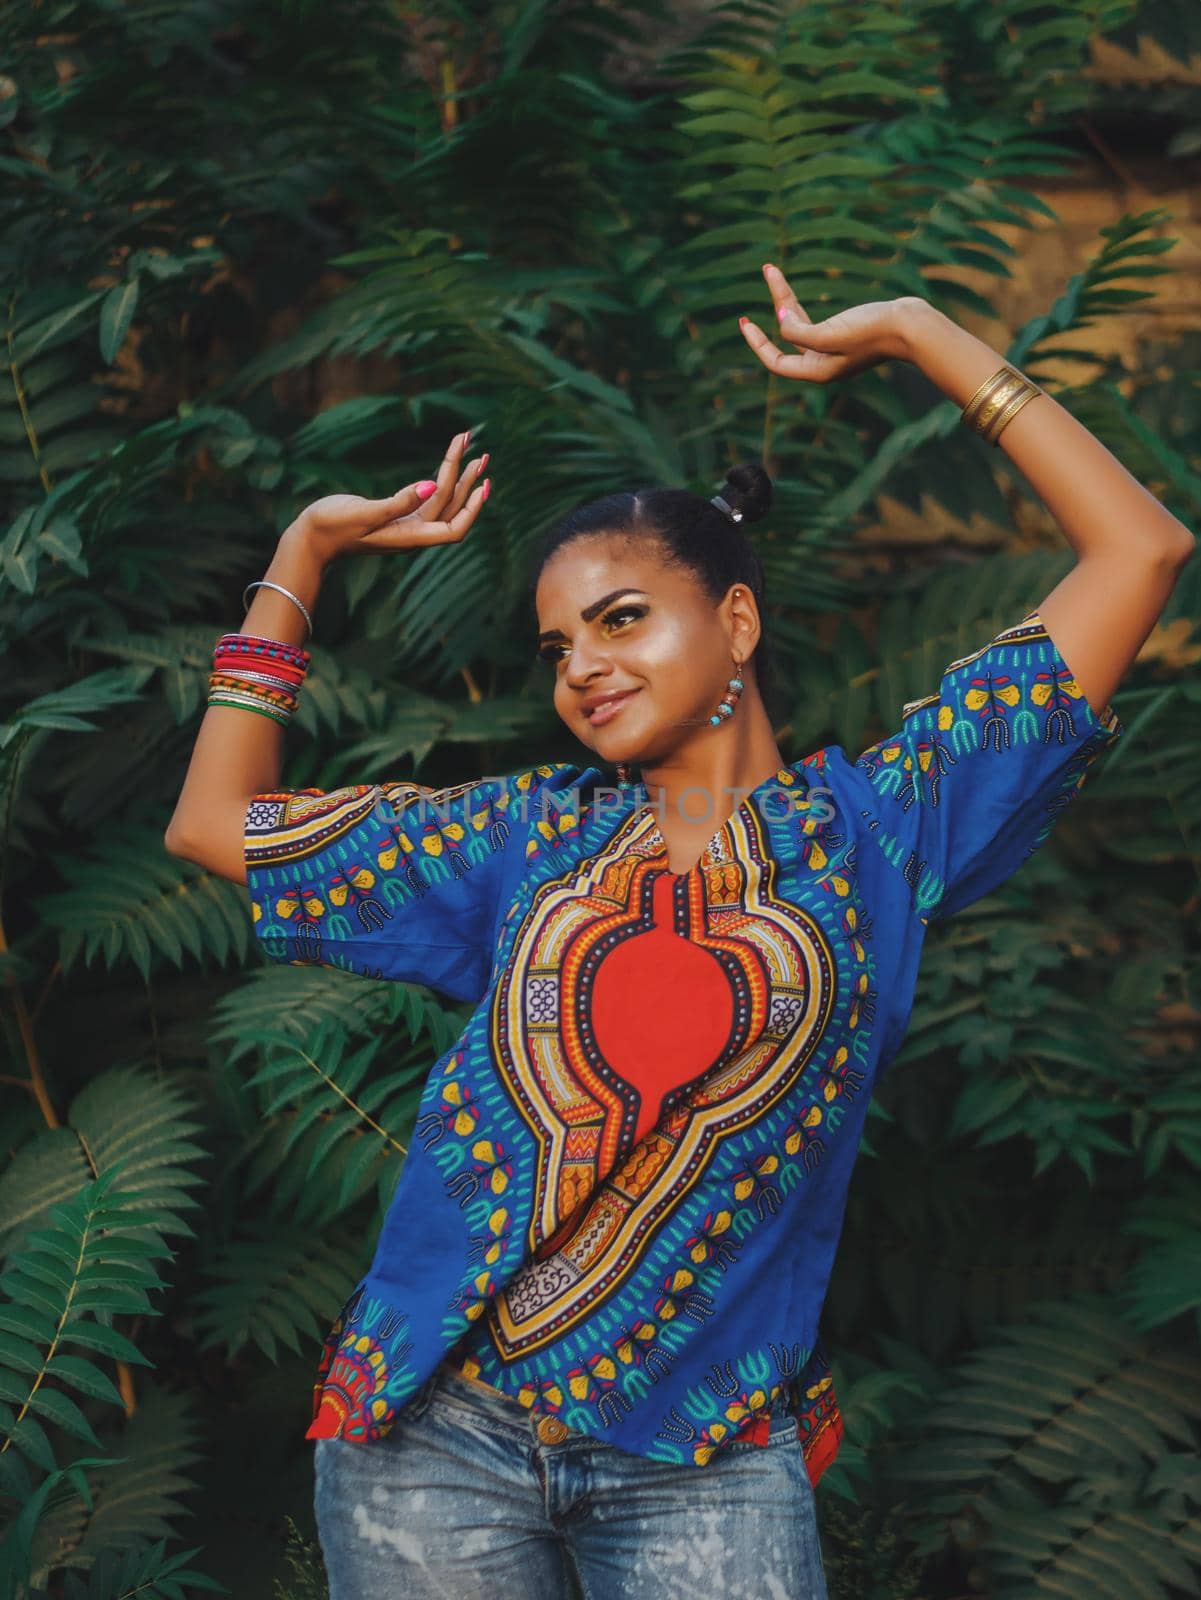 Afro-american woman dancing outdoor. Multi ethnic girl wearing colorful clothing posing, enjoys the nature. Green tropical background by kristina_kokhanova